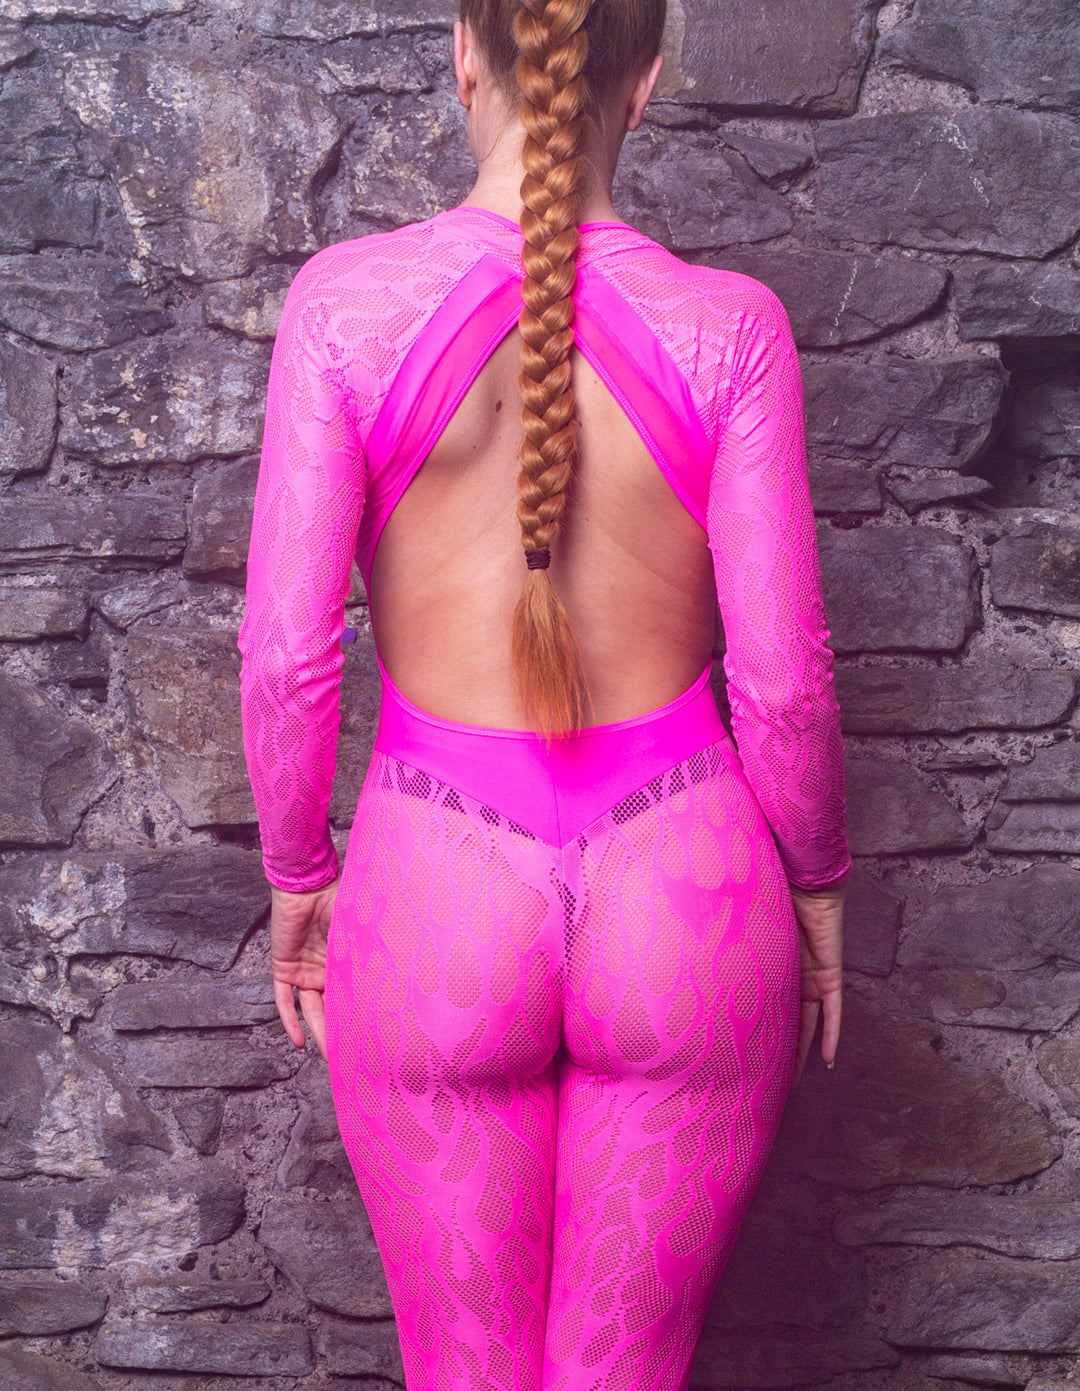 back view of lady wearing a backless, neon pink flame mesh lace catsuit with sleeves